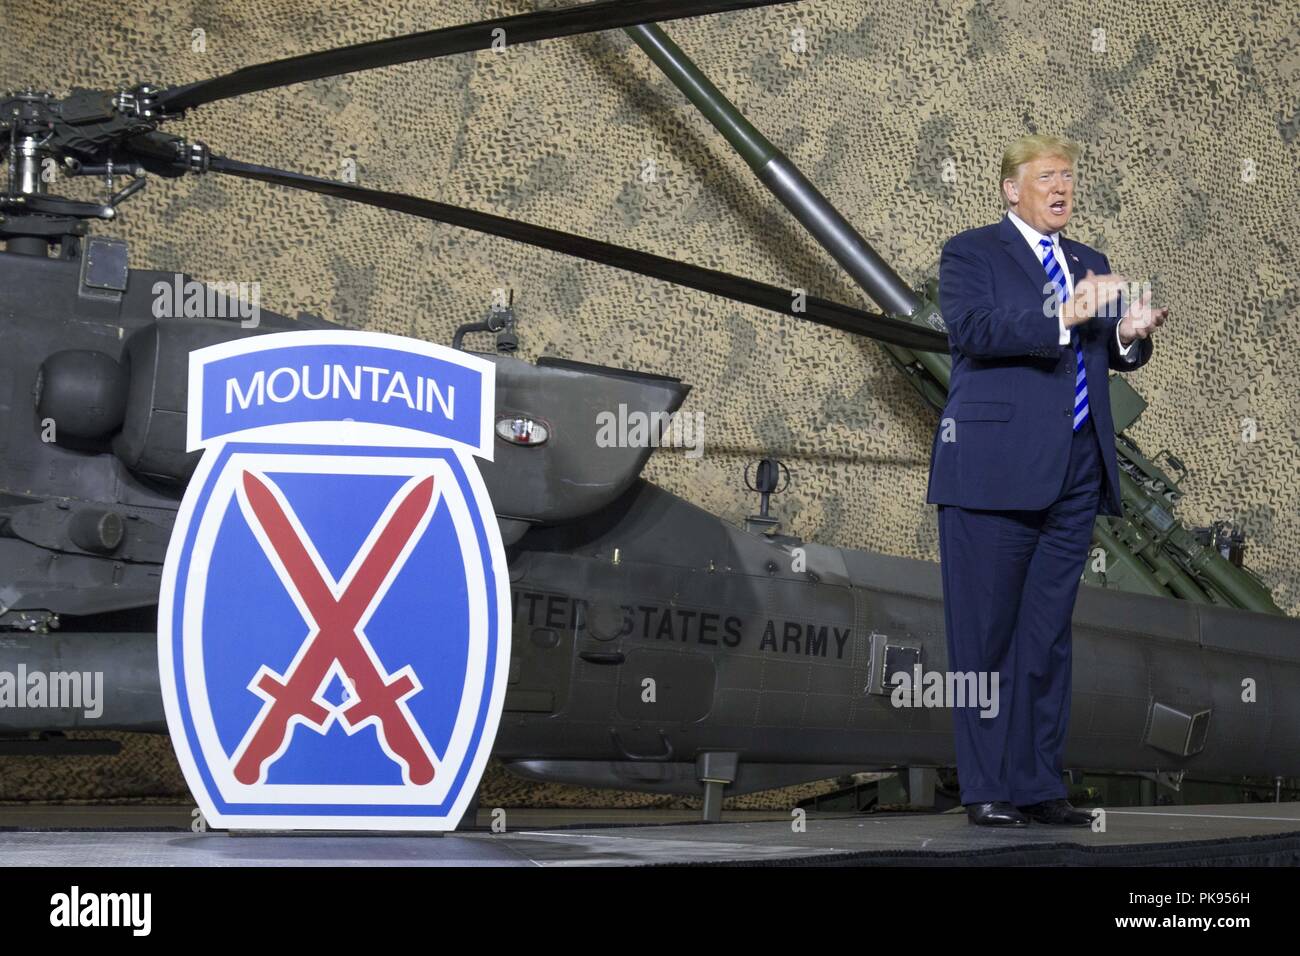 President Donald J. Trump applauds 10th Mountain Division (LI) Soldiers at Fort Drum, New York, on August 13, August 13, 2018. President Trump was visiting the U.S. Army post to sign the National Defense Authorization Act of 2019, which raises Soldier pay by 2.6 percent recognizing the service and sacrifice they make on behalf of our Nation. (U.S. Army photo by Sgt. Thomas Scaggs) 180813-A-TZ475-851. () Stock Photo